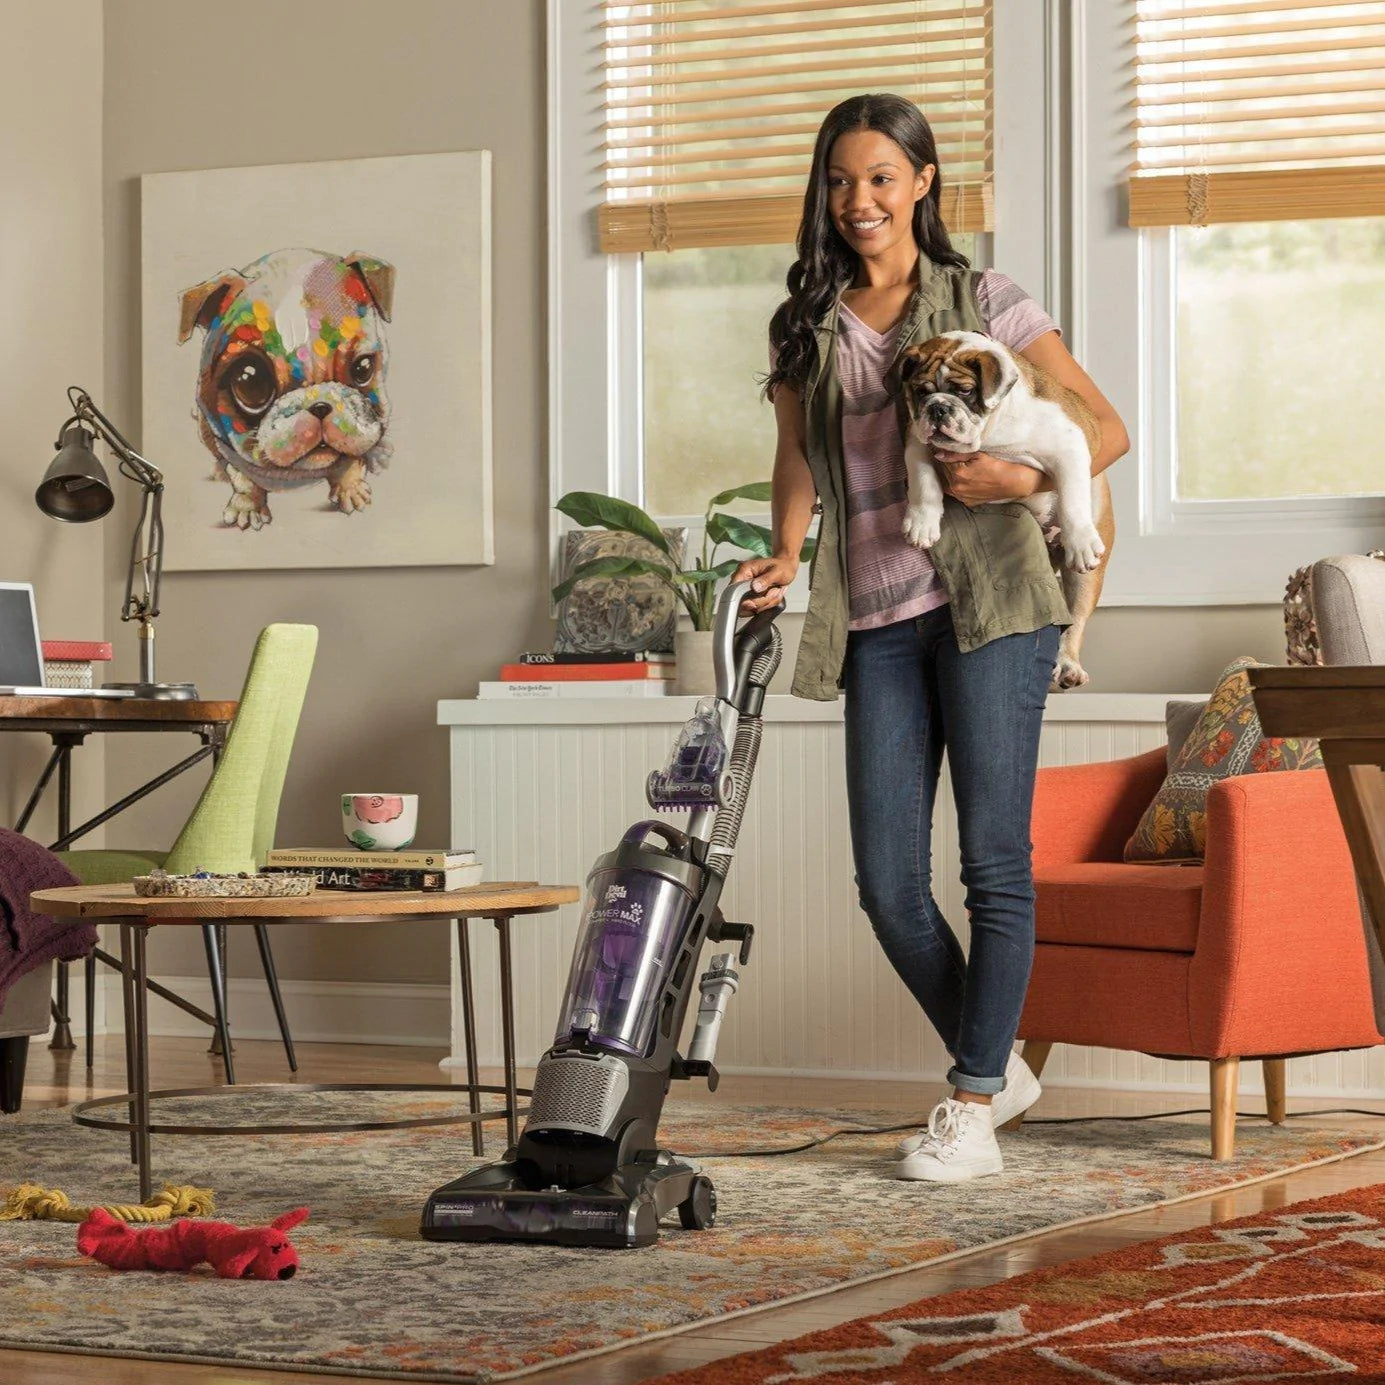 A woman vacuums using her purple and silver vacuum while holding her bulldog in her living room